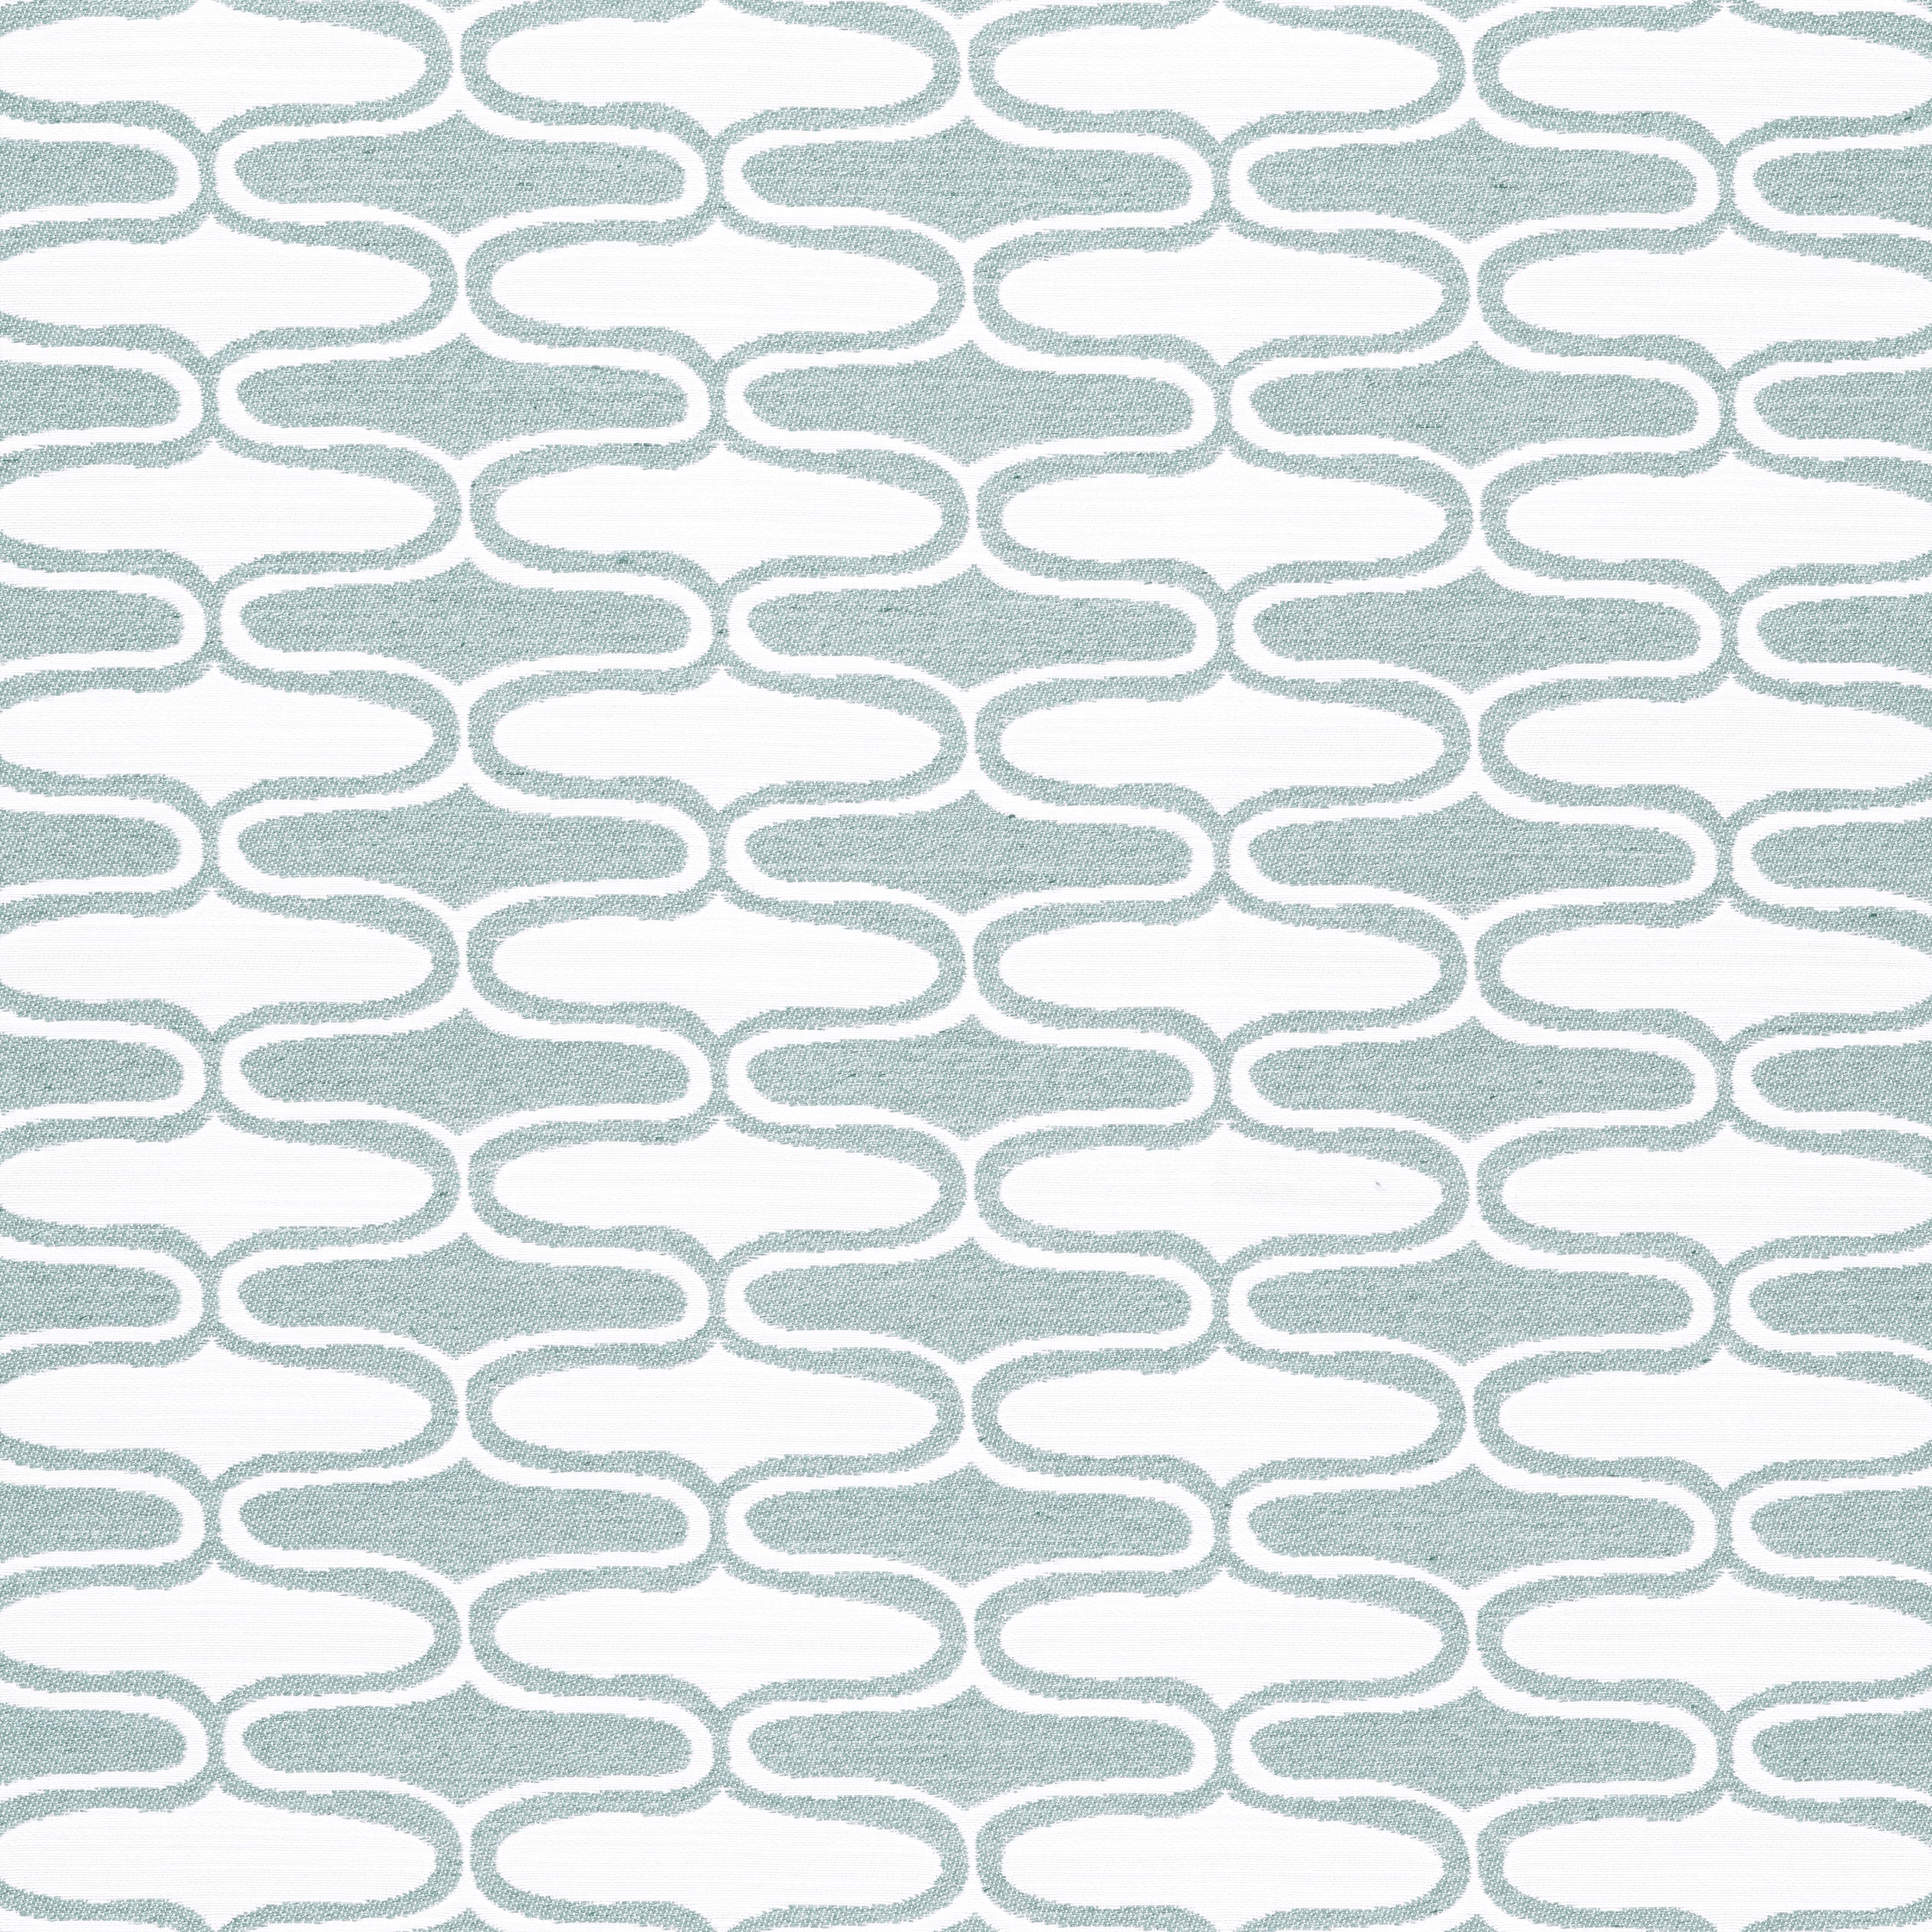 Saraband fabric in seafoam color - pattern number W8530 - by Thibaut in the Villa collection